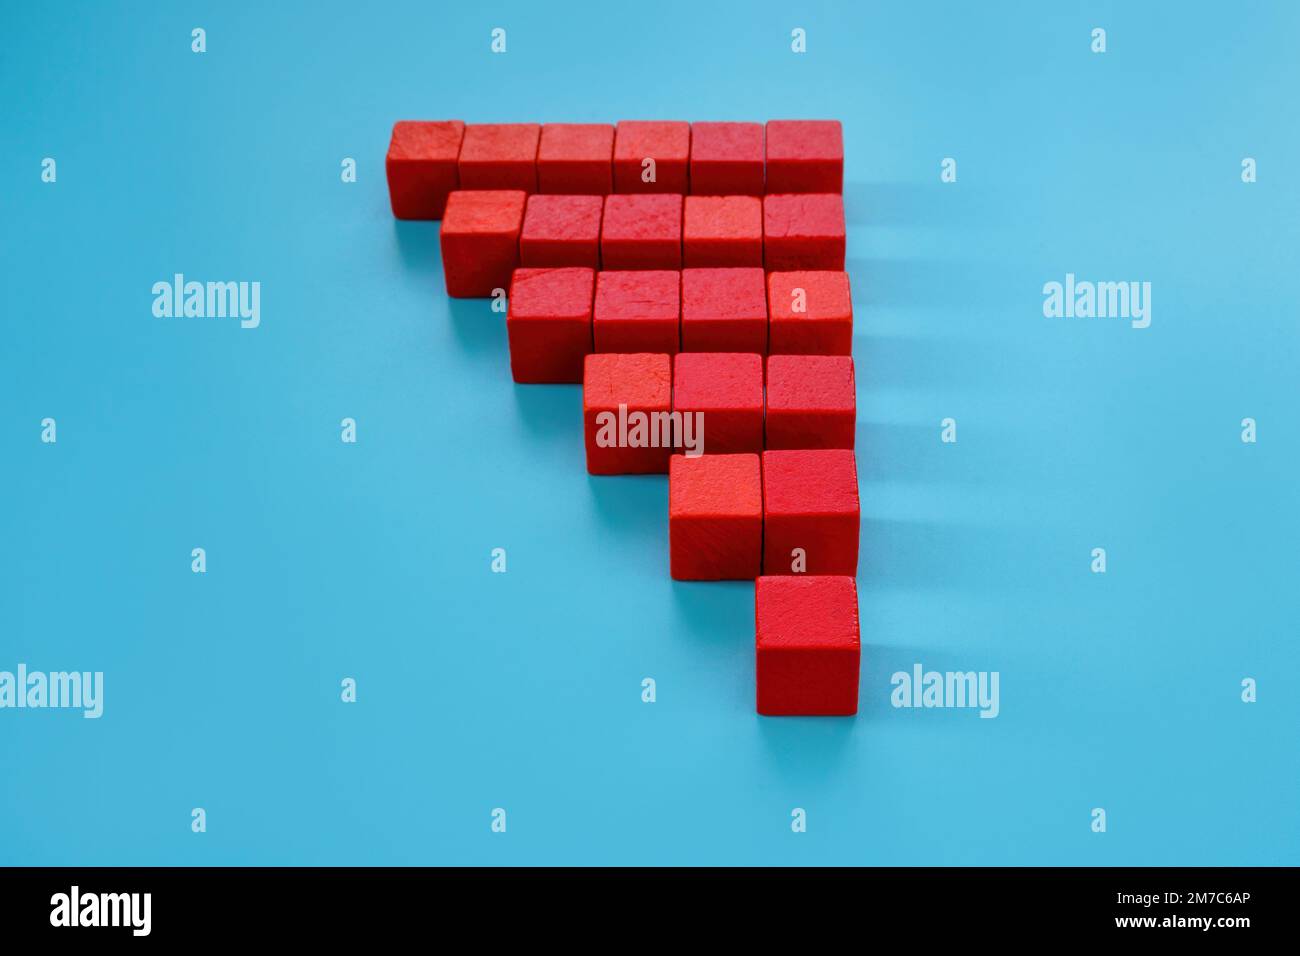 Pyramid of red cubes as a concept of increase, growth or addition. Stock Photo